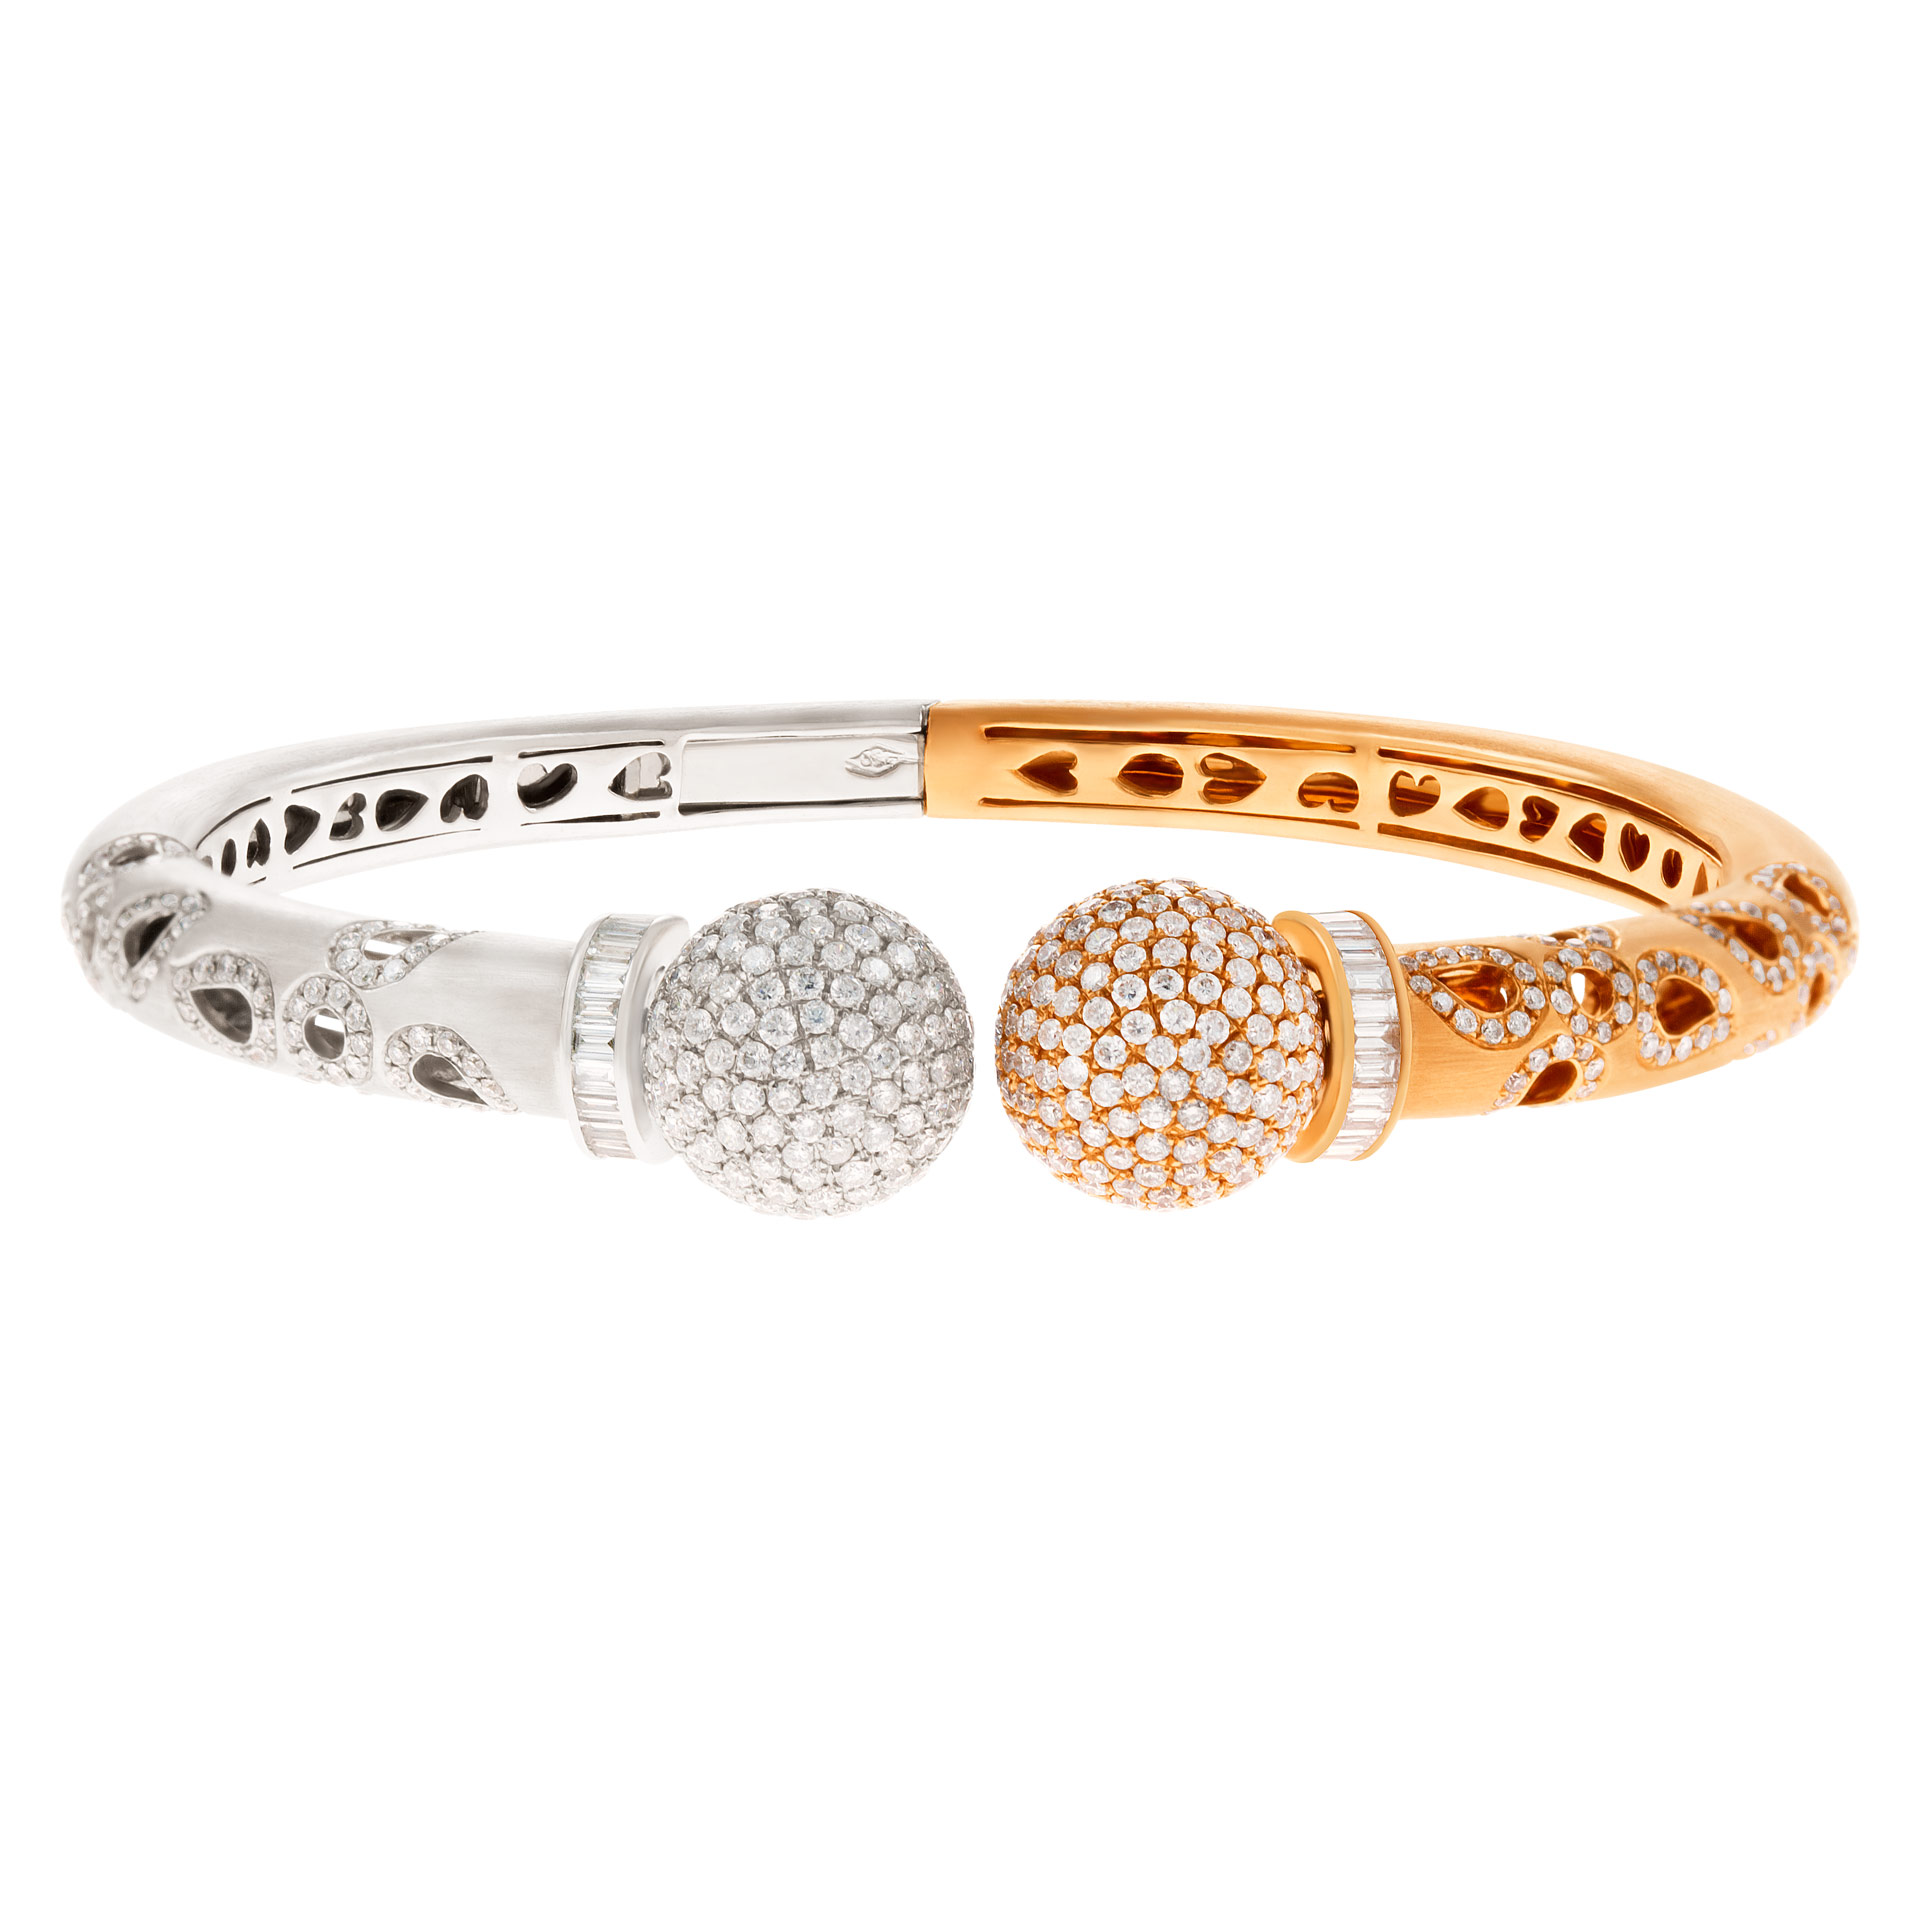 Matte two tone bangle in 18k with diamond accents